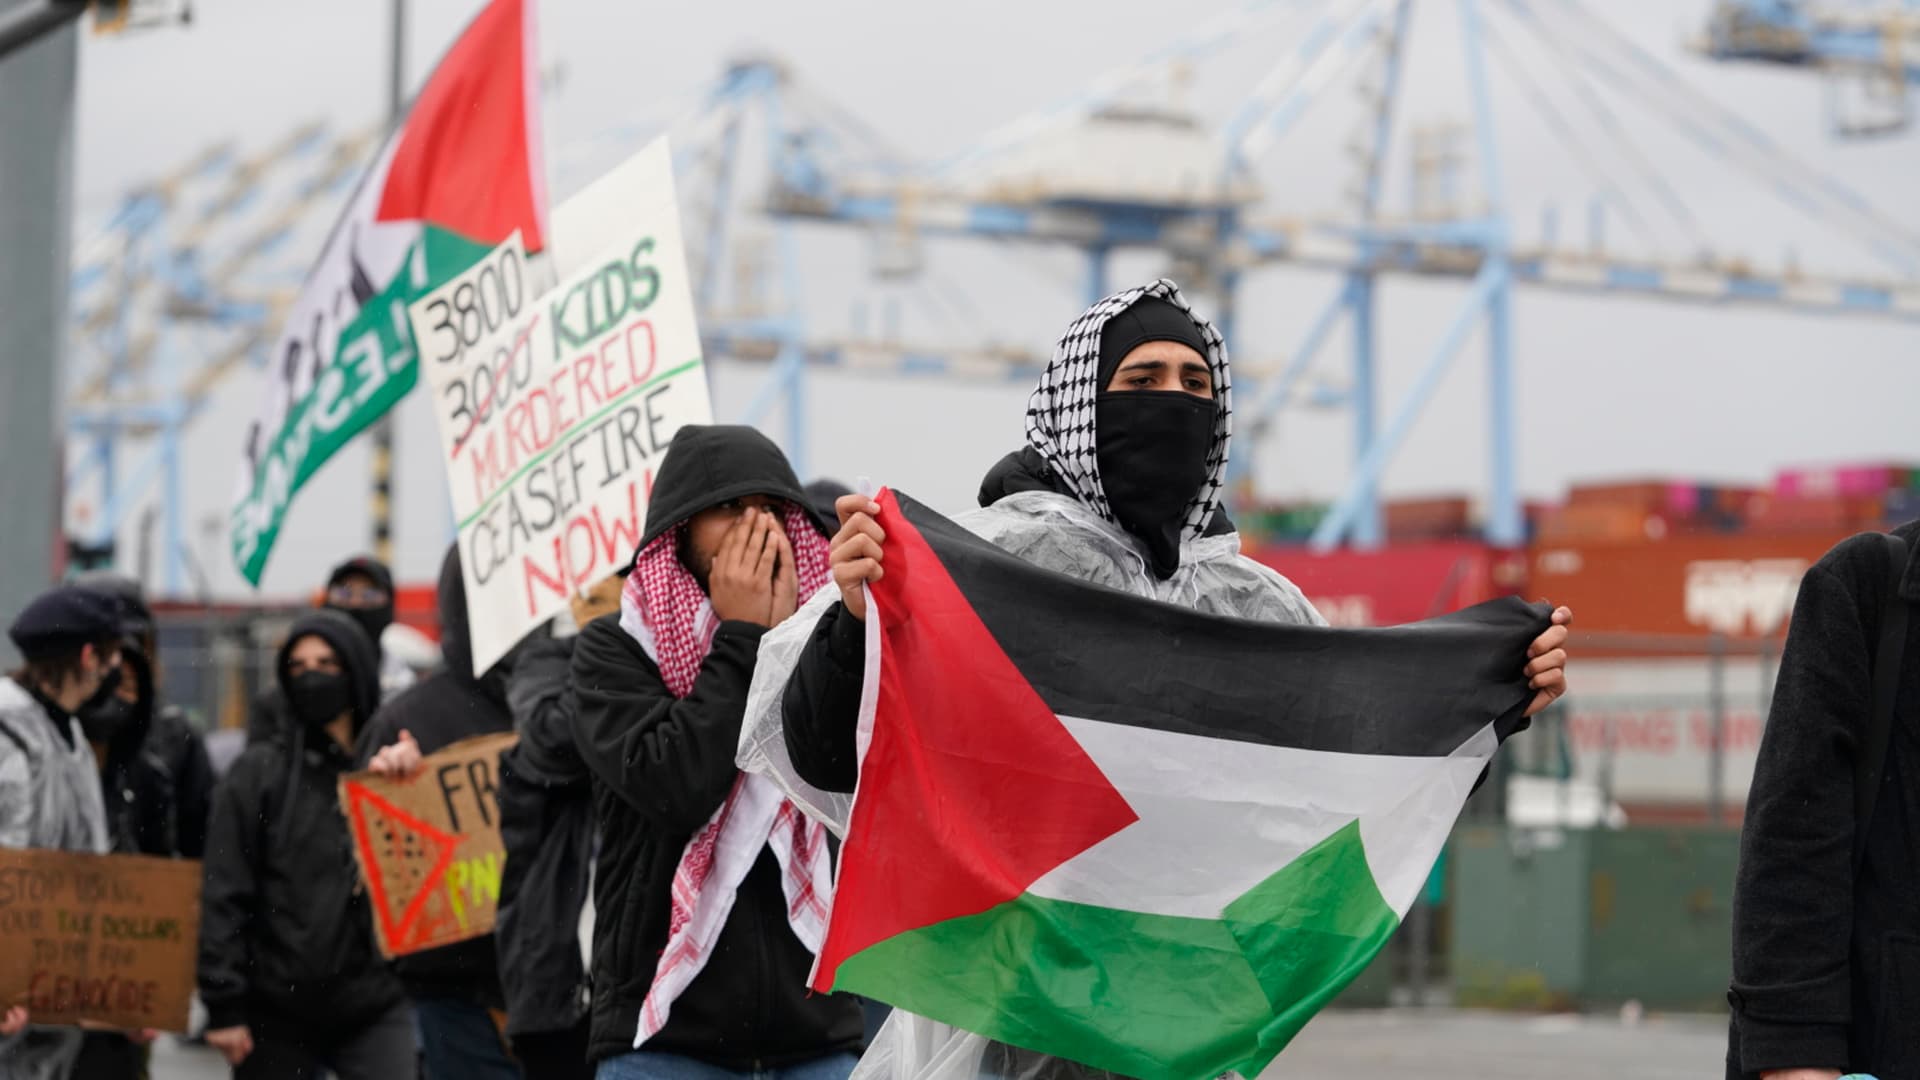 Pro-Palestinian protesters block access to an entry point at the Port of Tacoma in Tacoma, Washington, US, on Monday, Nov. 6, 2023. The protesters are demonstrating what they believe is a military supply ship that is docked at the port and bound for Israel, according to the Seattle Times. Photographer: M. Scott Brauer/Bloomberg via Getty Images